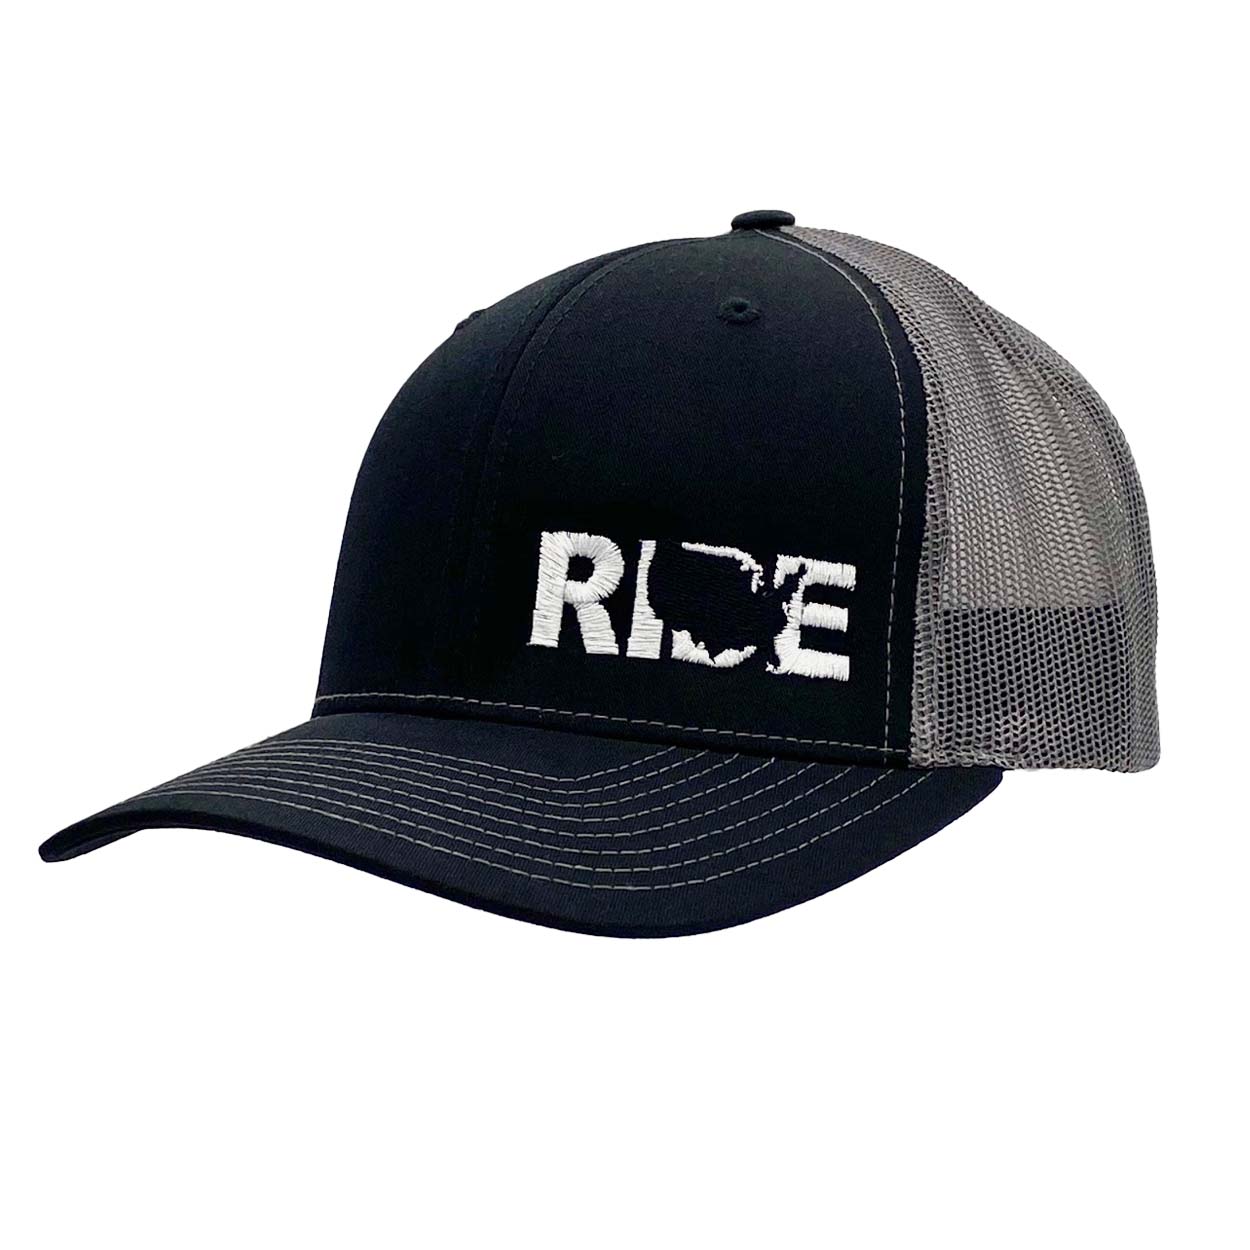 Ride United States Night Out Pro Embroidered Snapback Trucker Hat Black/Gray